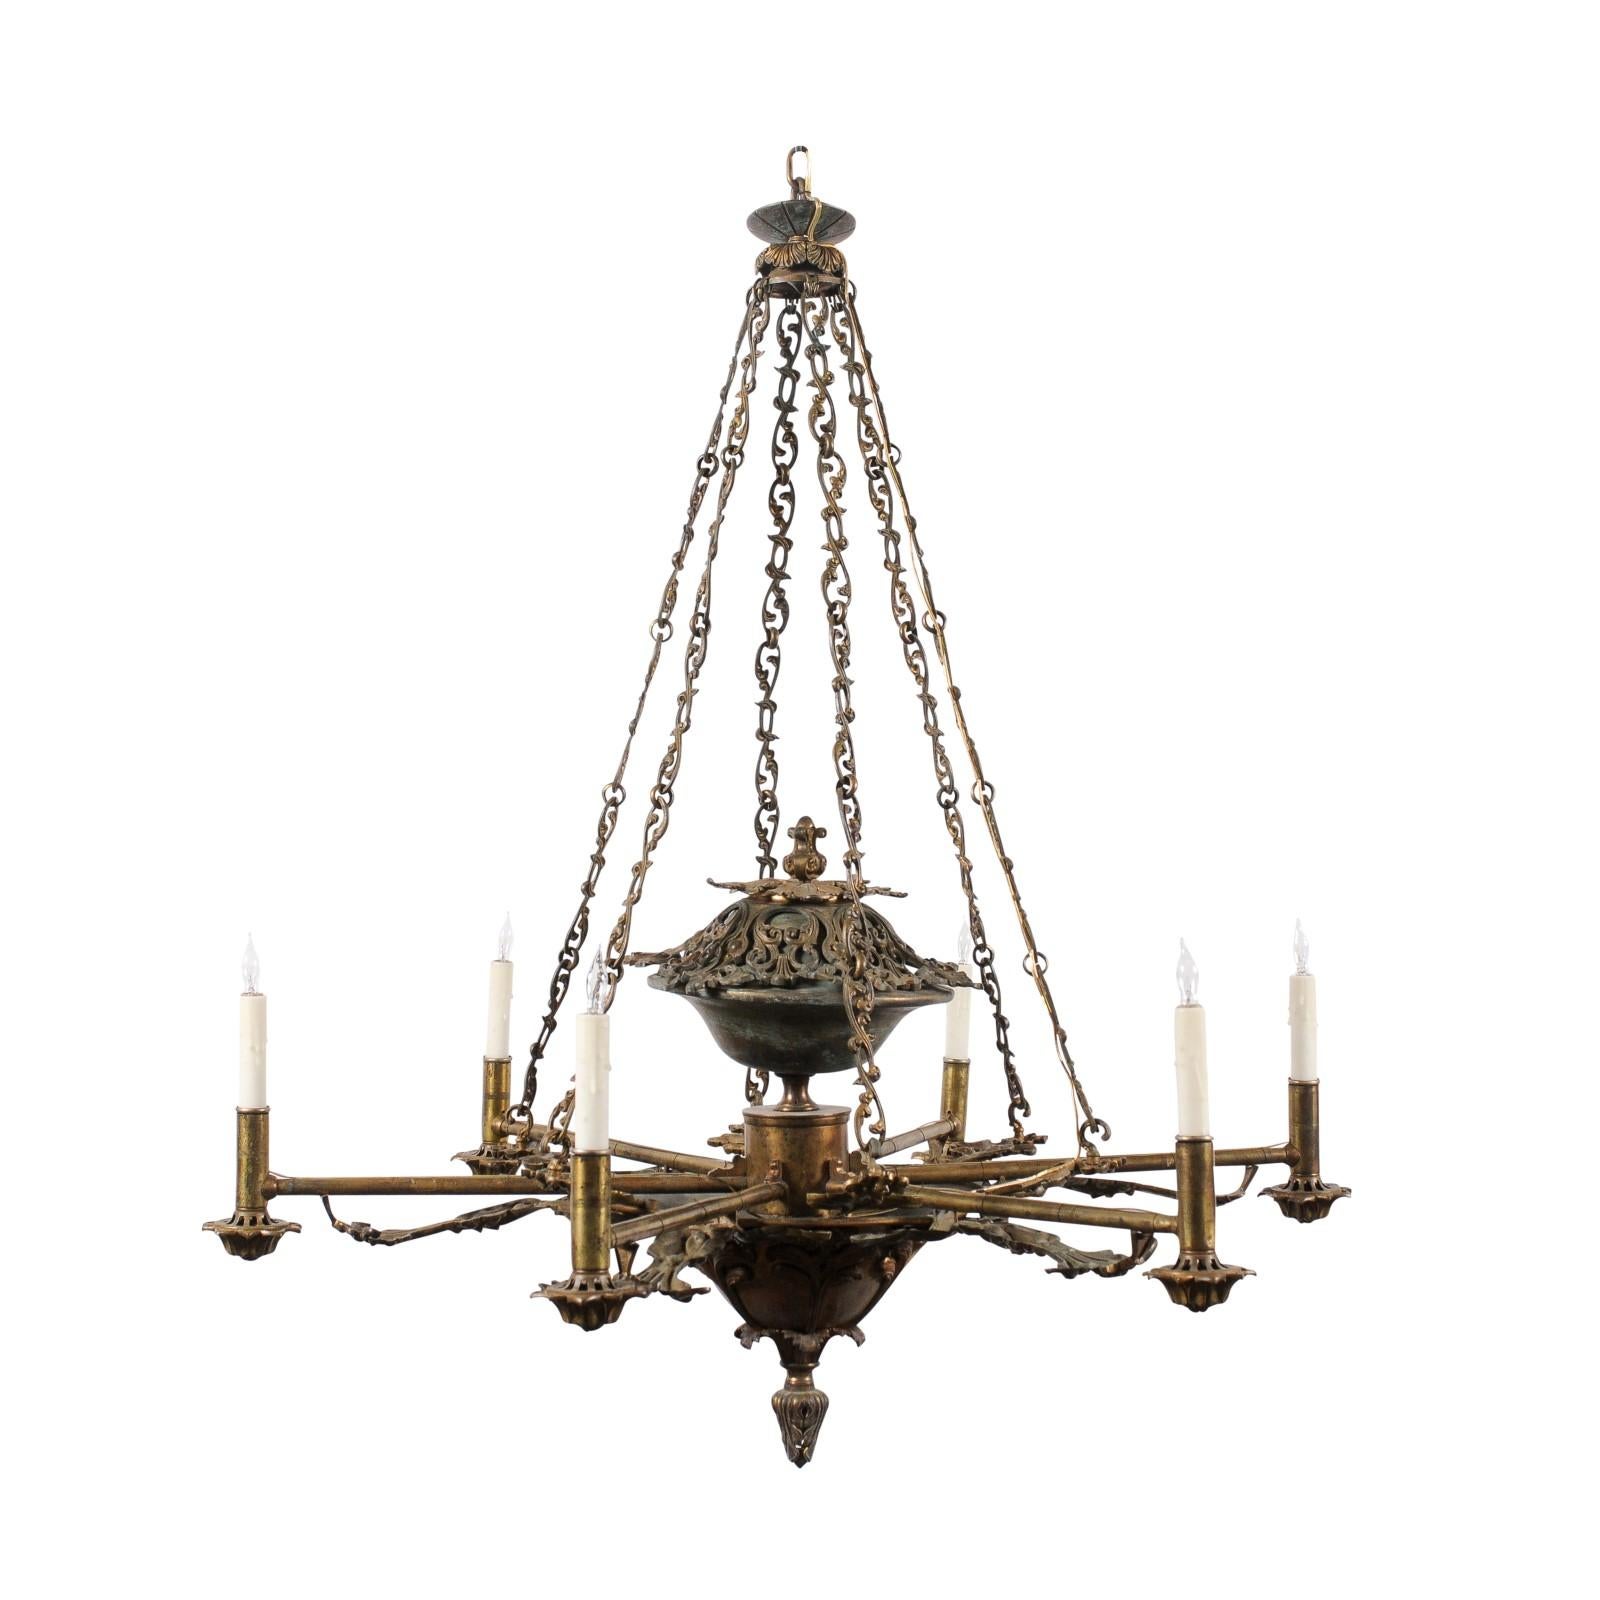  Italian Mid 19th Century Bronze Chandelier with Foliage Detail and 6 Lites In Good Condition For Sale In Atlanta, GA